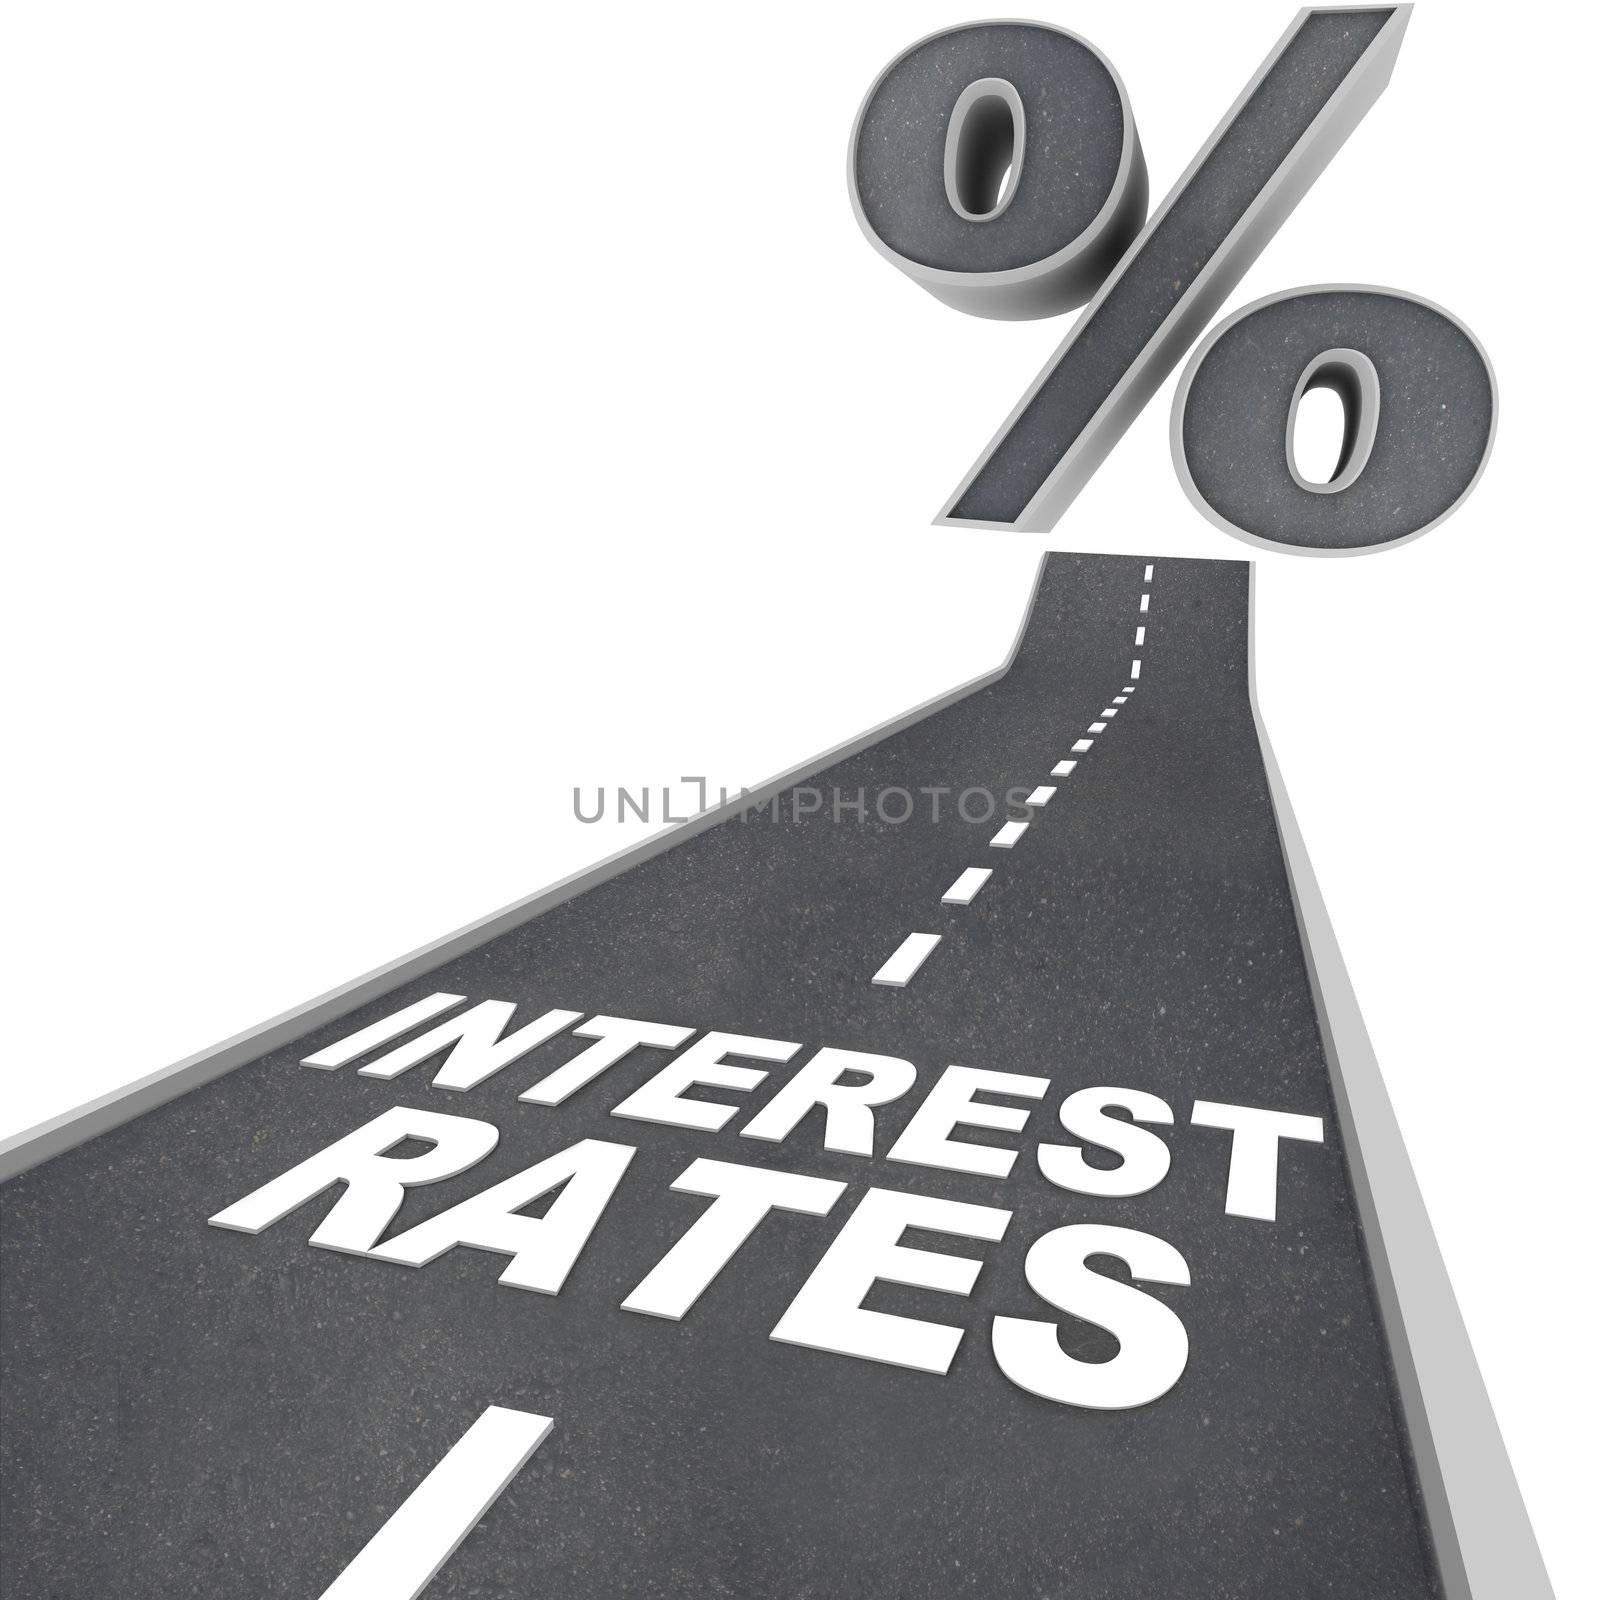 The words Interest Rates on a blacktop road and a percent sign at the top of the street, symbolizing the rising interest rates due to economic factors and conditions